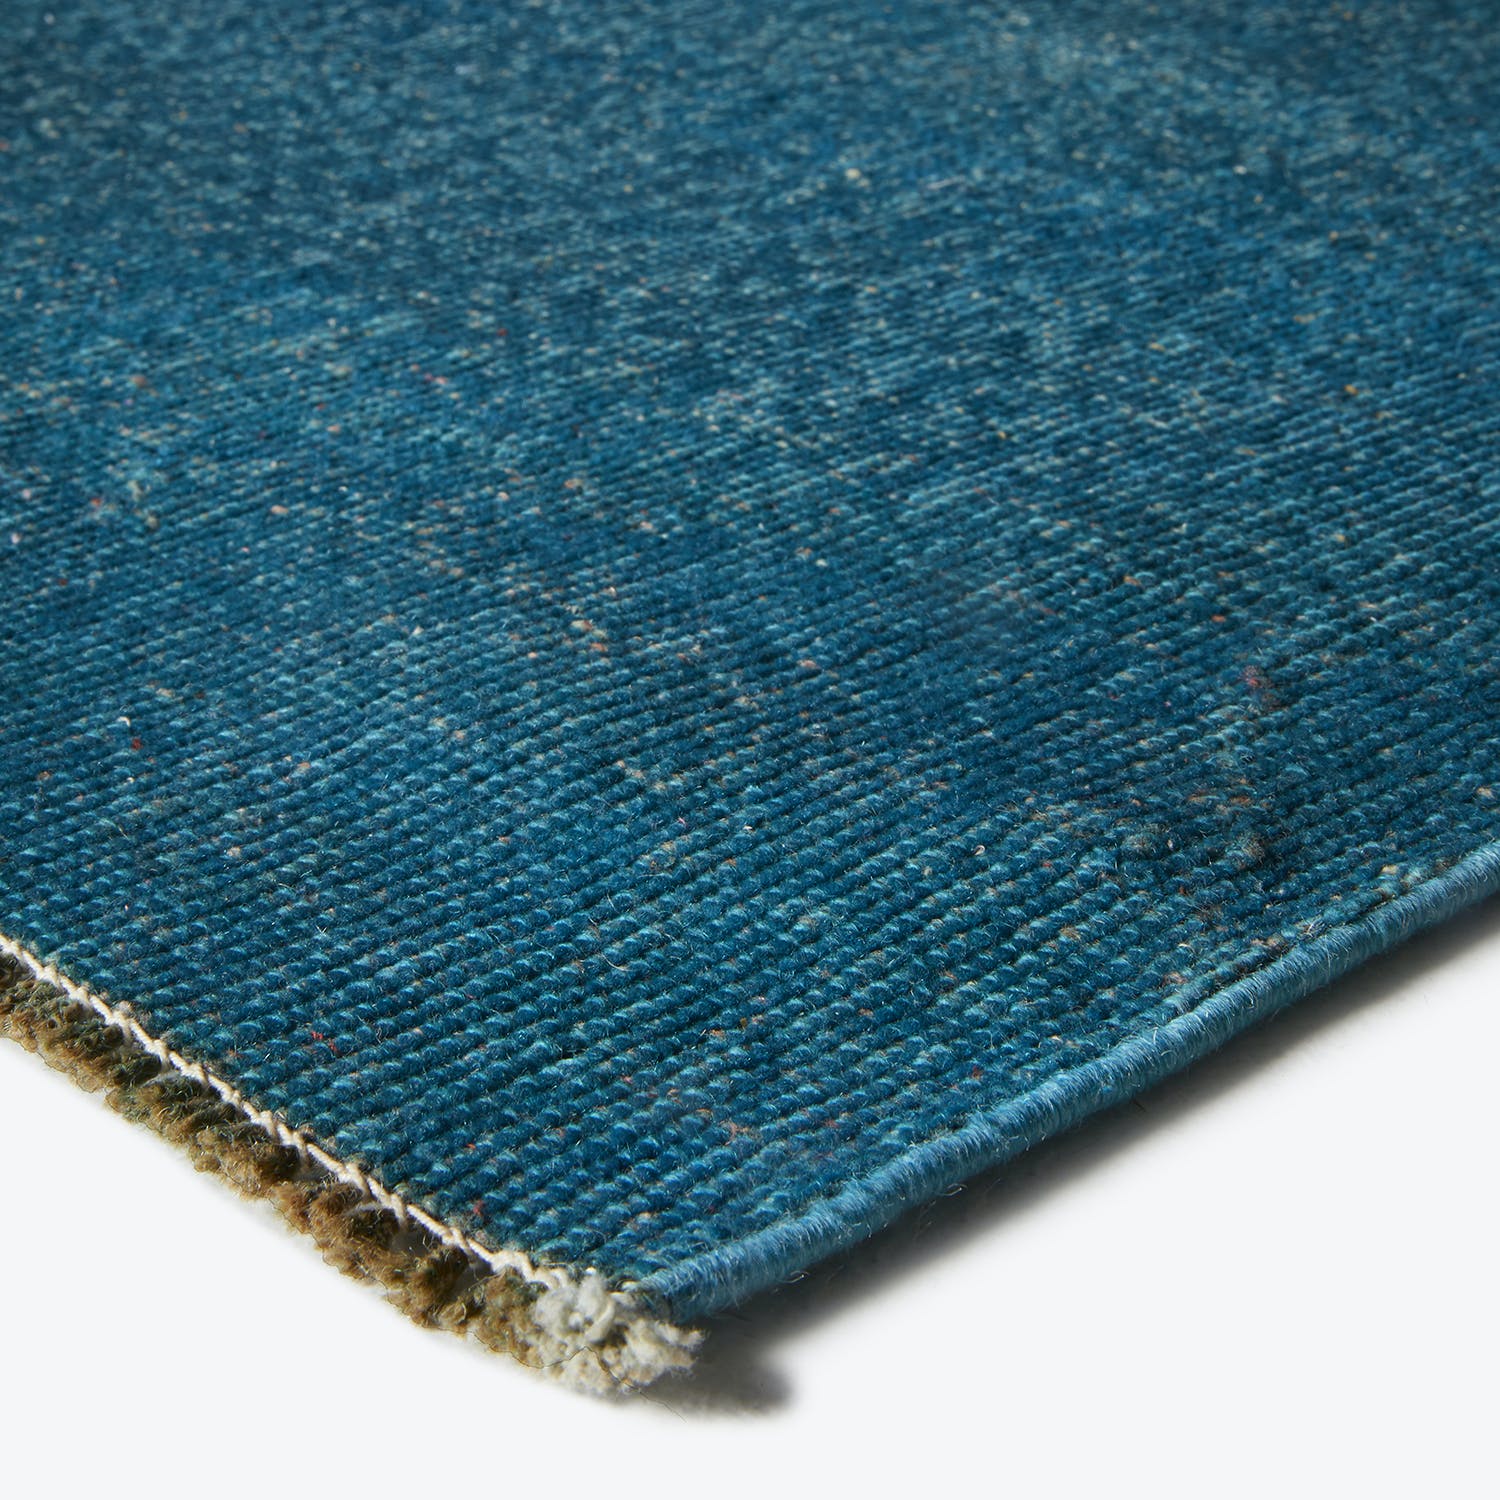 Close-up of a sturdy blue carpet with frayed edges.